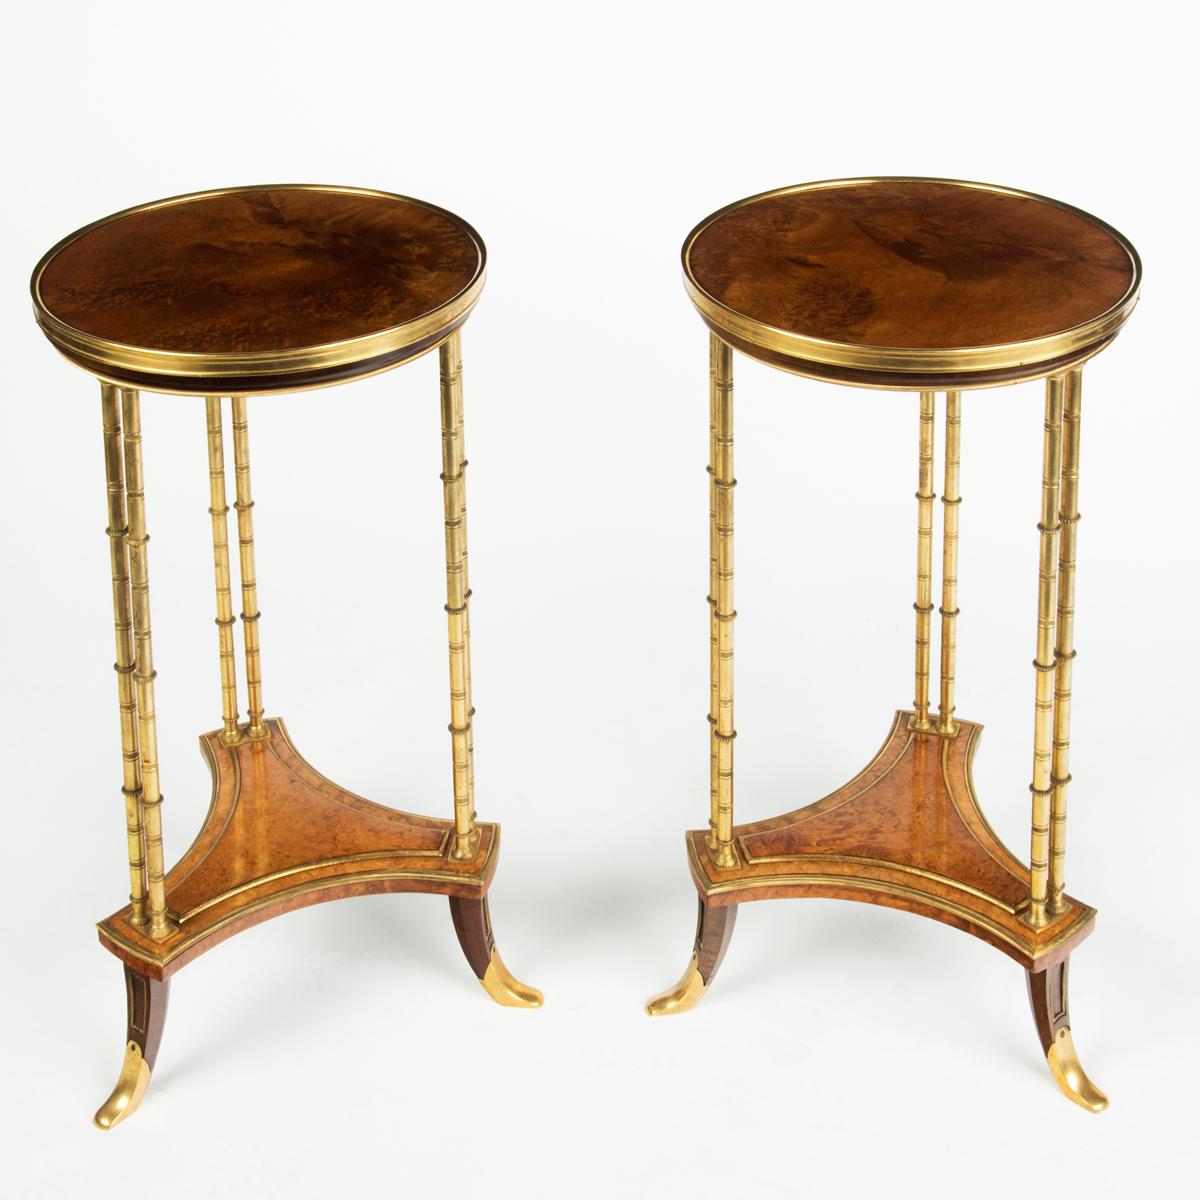 French A pair of Louis XVI style mahogany and ormolu gueridons, after Adam Weisweiler For Sale